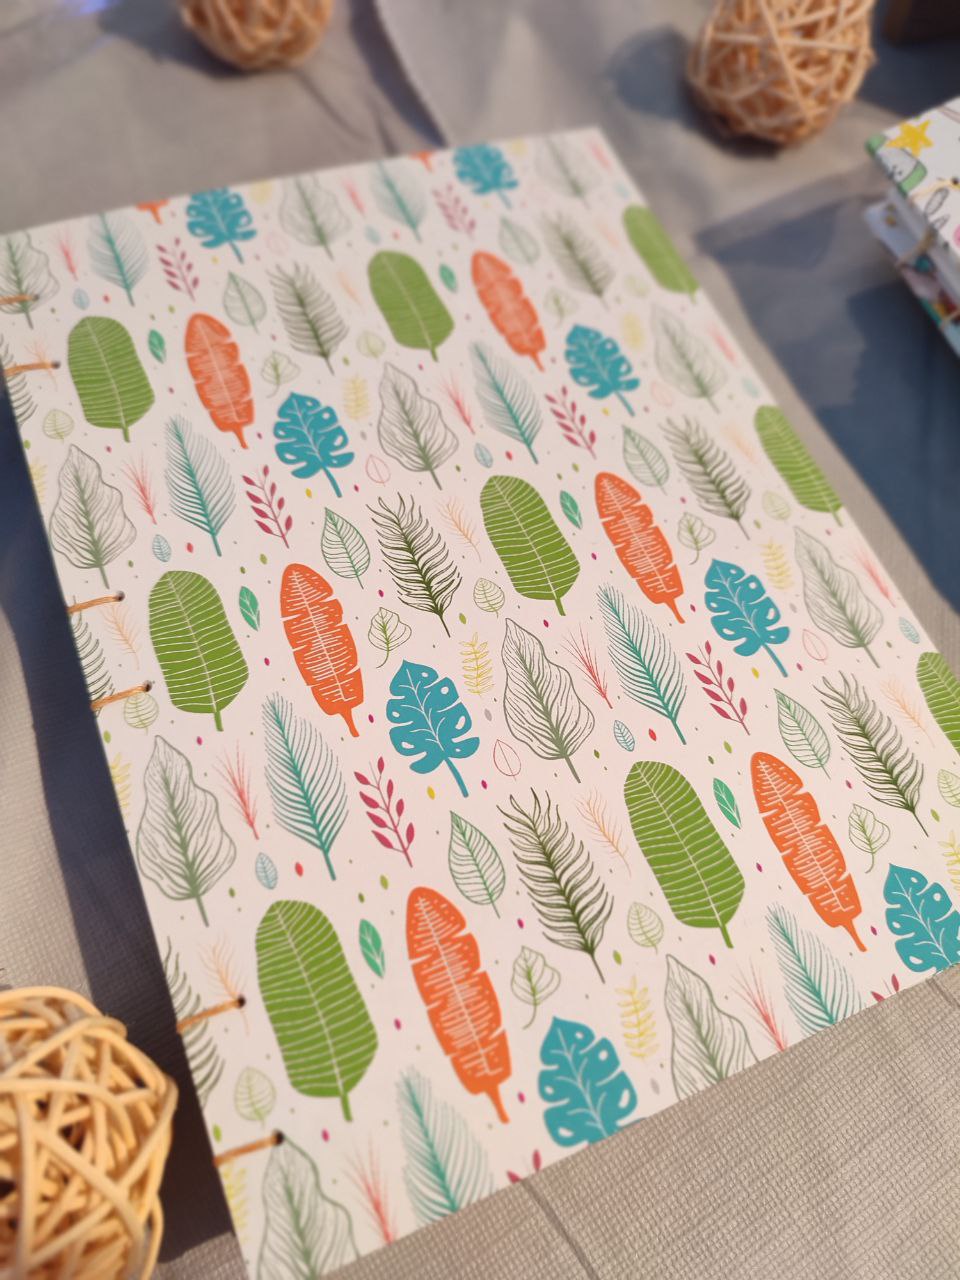 An image of handmade journal with vibrant leaves on a cover laying on a table